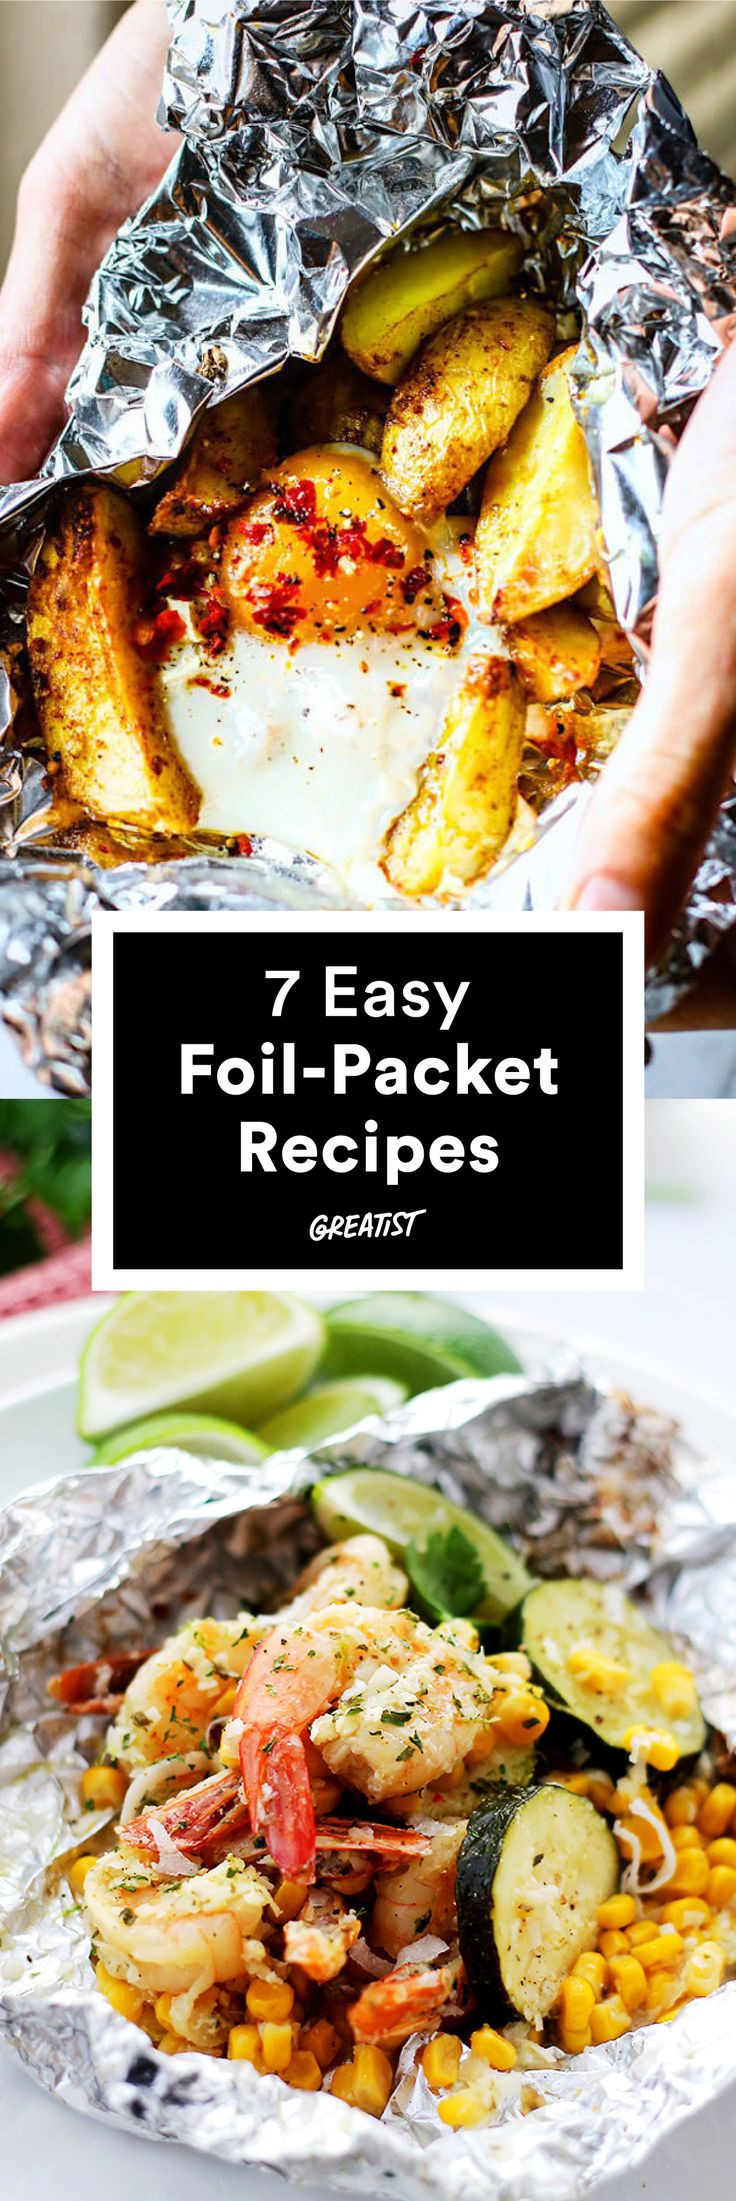 Vegetarian Foil Packet Recipes Camping
 7 Foil Packet Recipes That Make Cleanup a Breeze